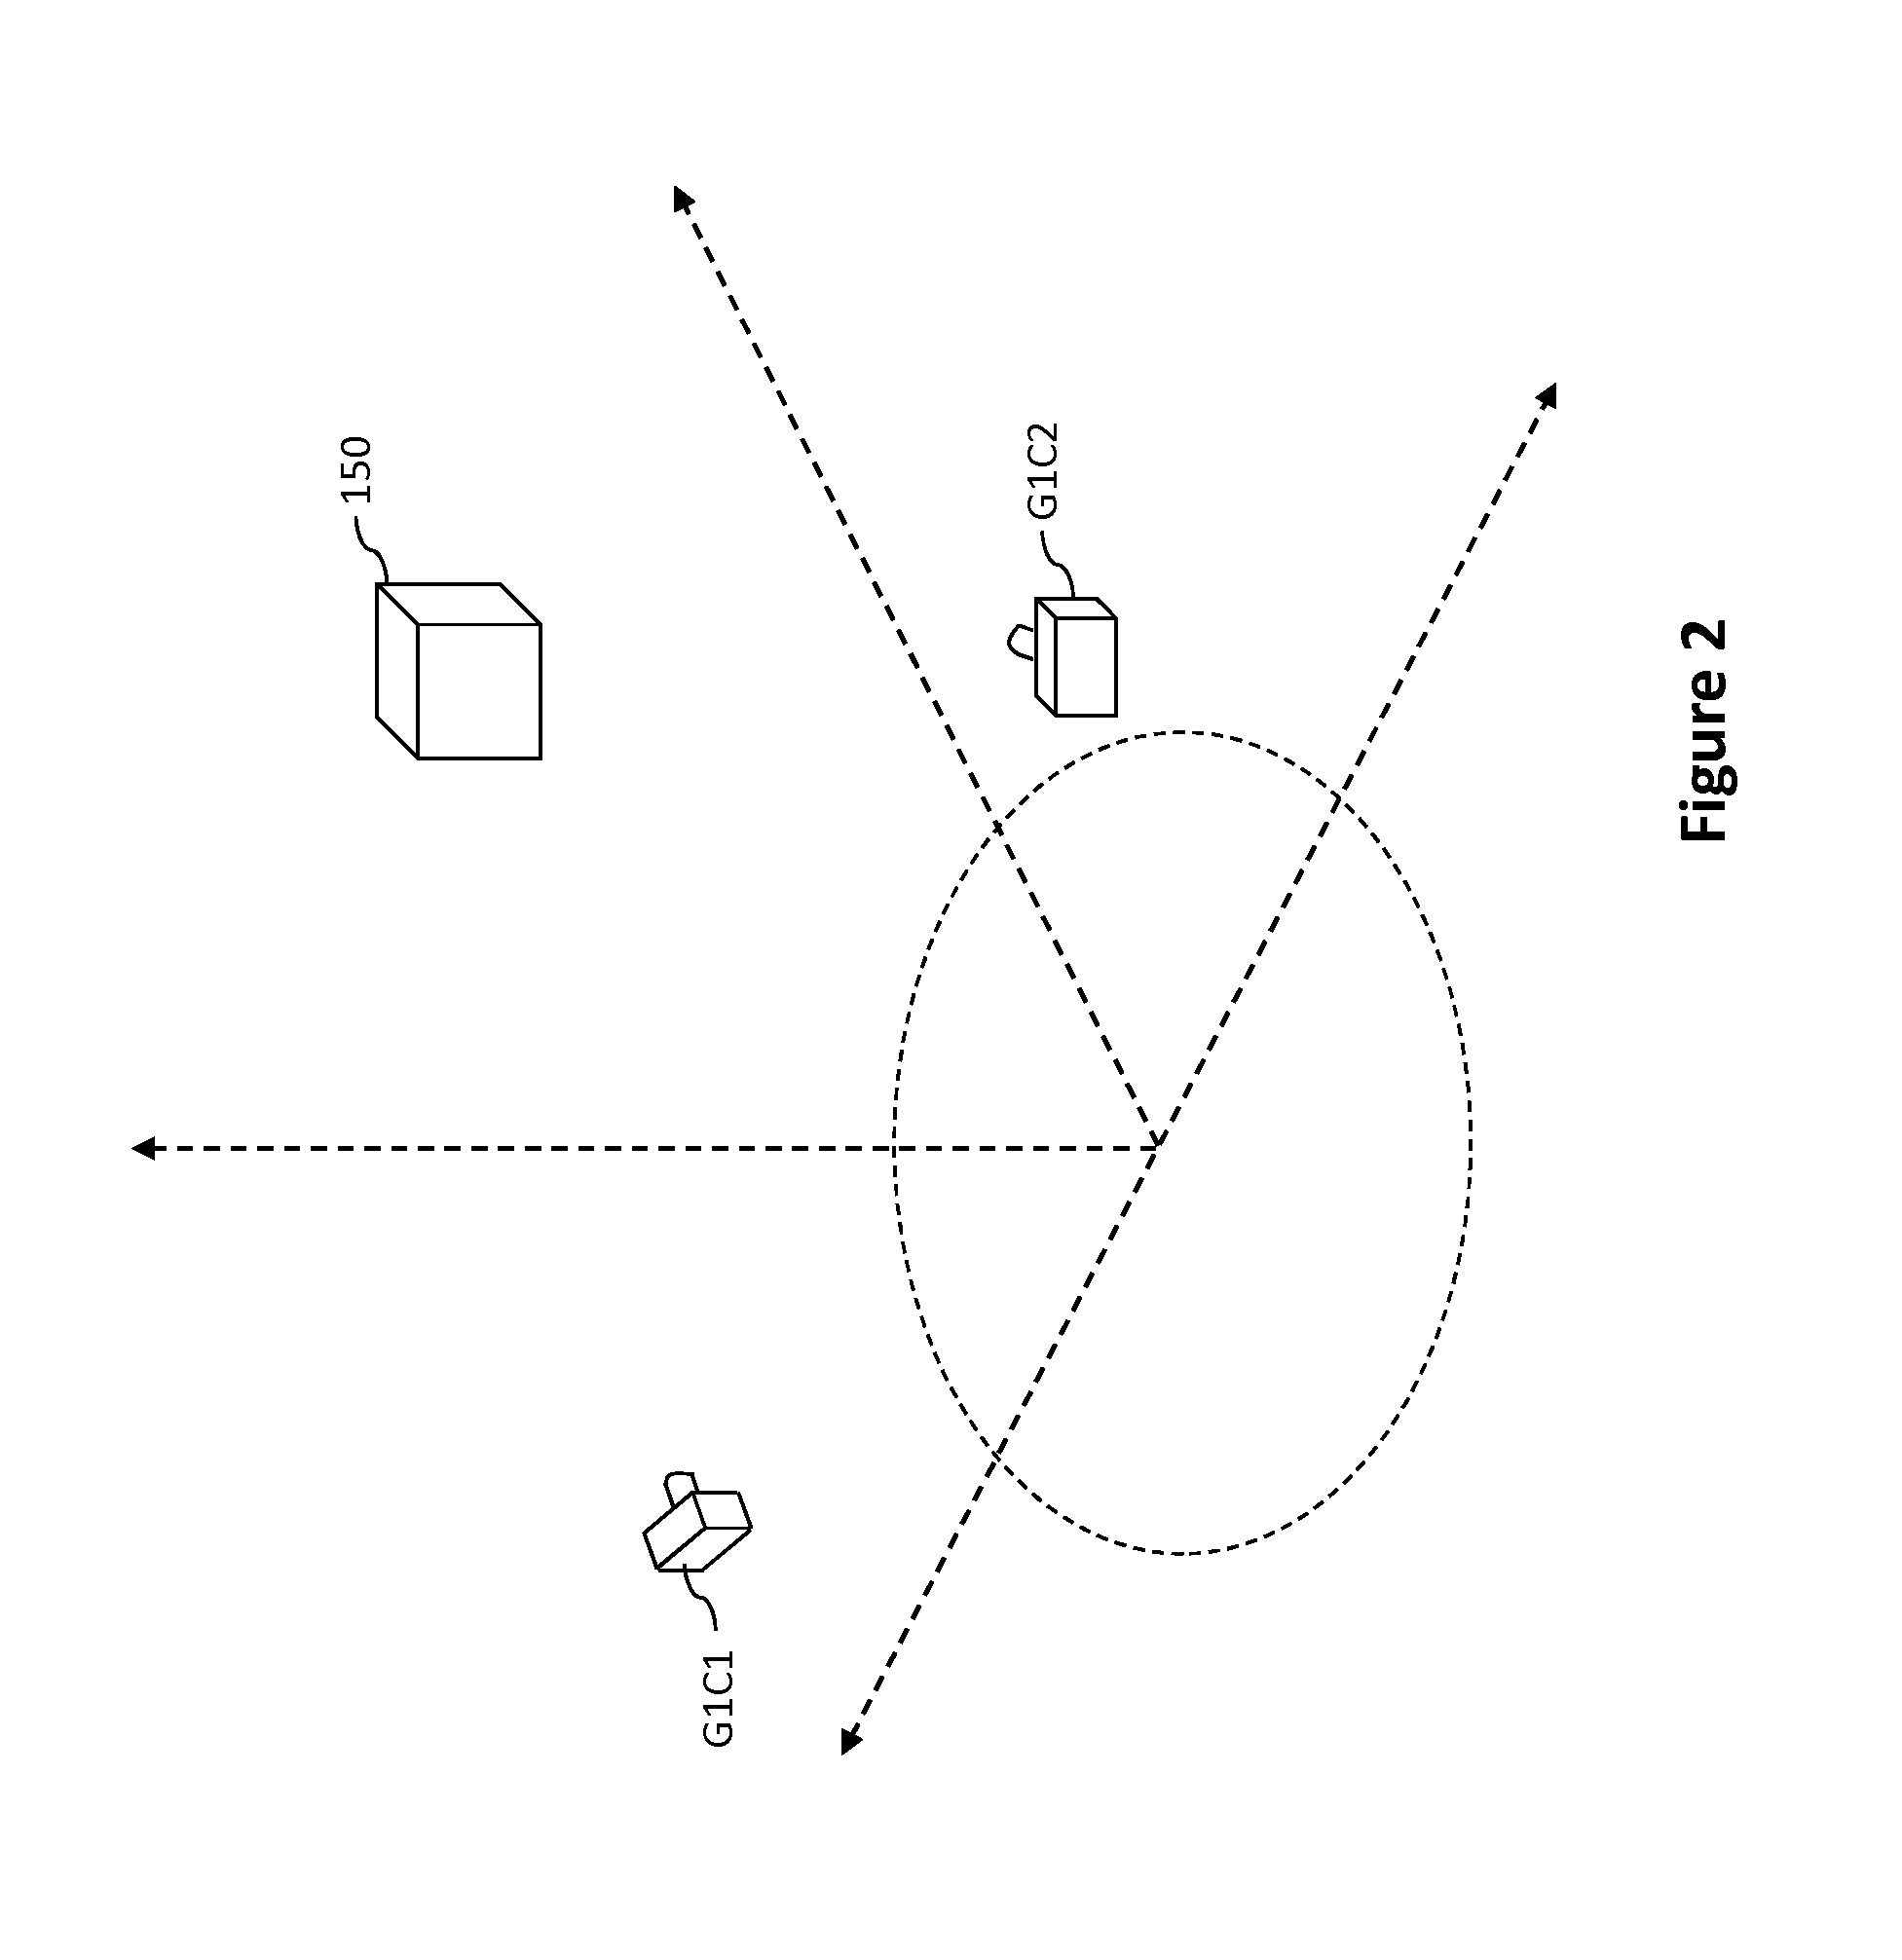 System and method for stereophotogrammetry